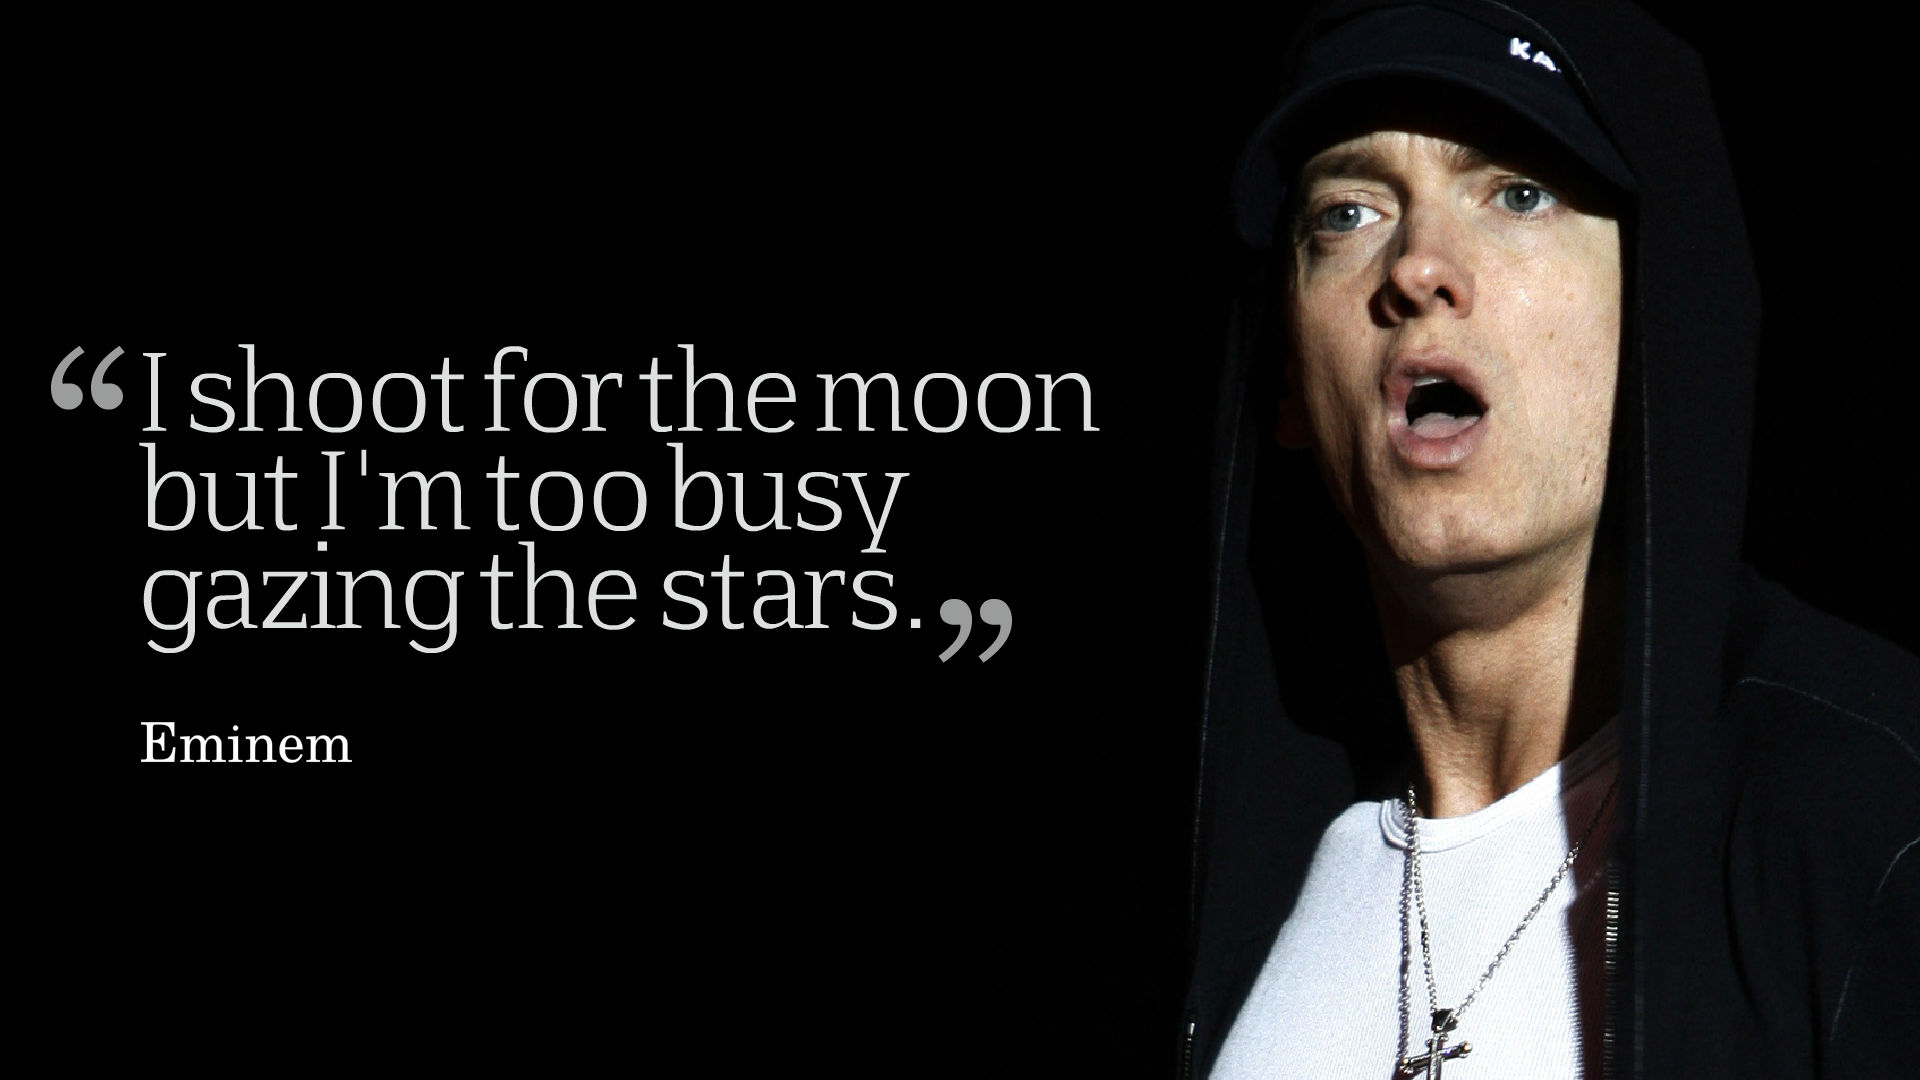 Eminem Quotes Wallpapers - ntbeamng